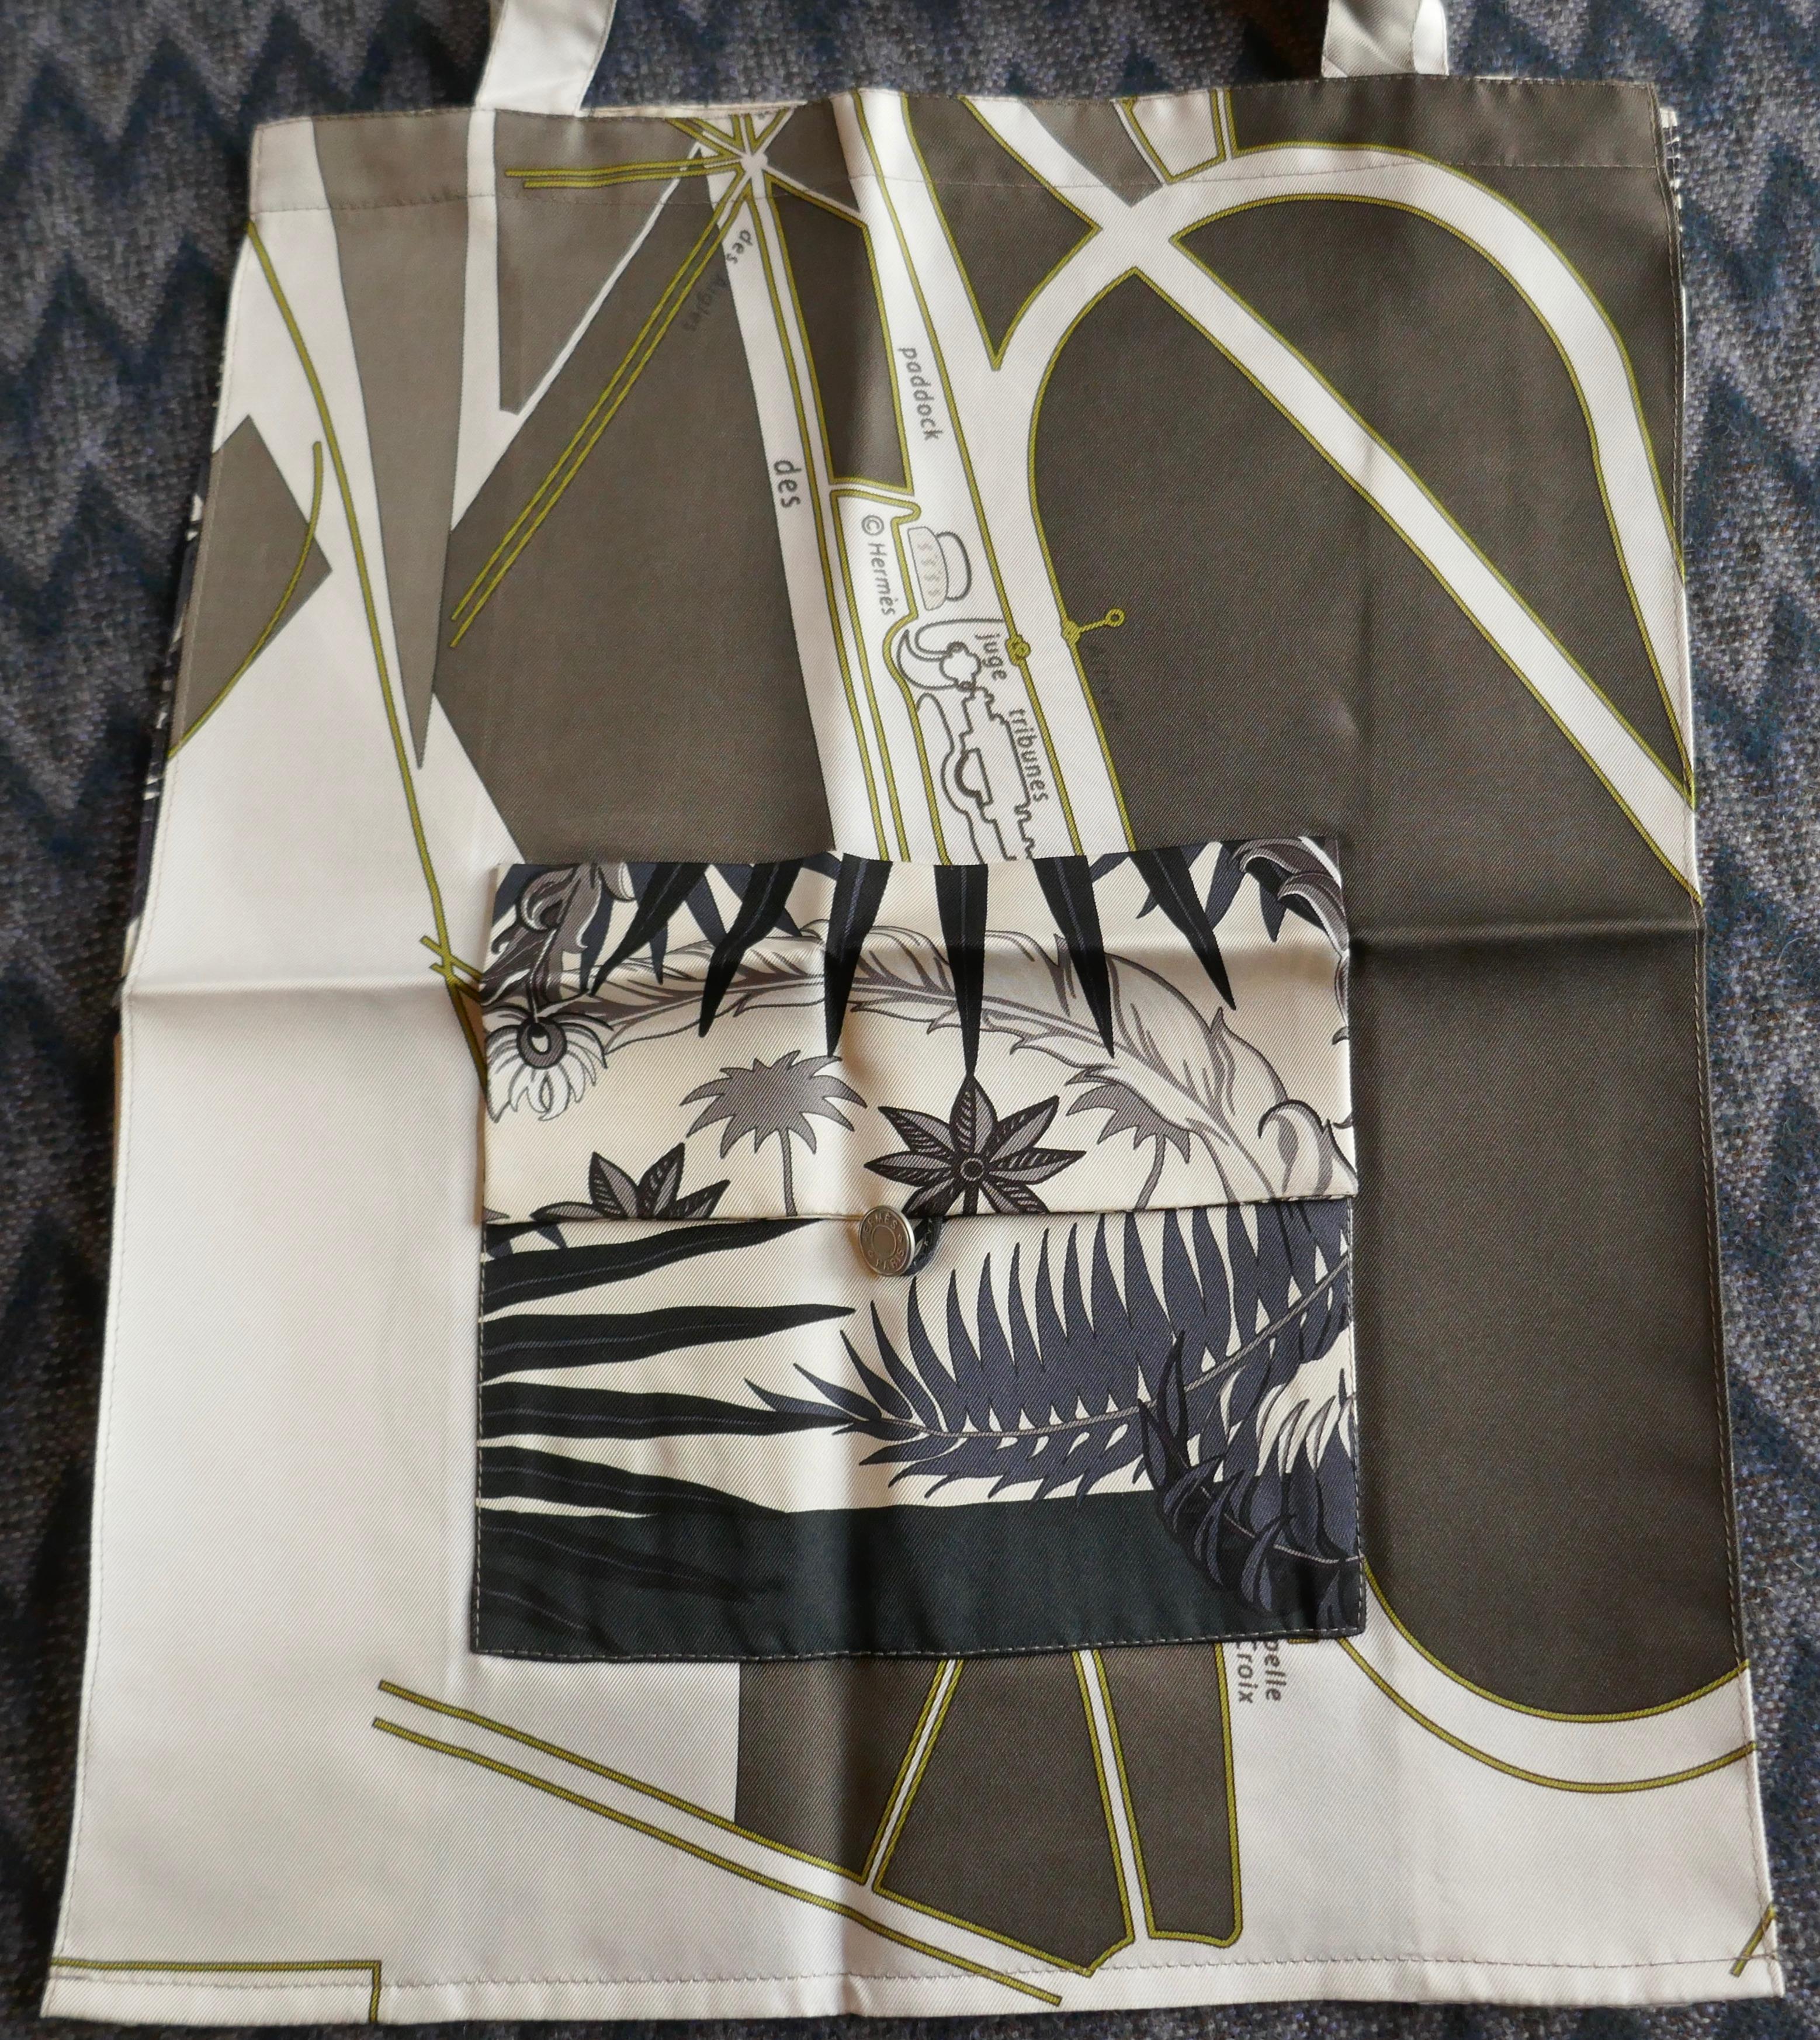 Hermes “Mythiques Phoenix” by Laurence Bourthoumieux Twill Silk Shopping Bag 


Incredible shopping bag made by the department Petit H with the scarf Mytiques Phoenix 
In its best palette Vert Anthracite, Vanilla, Aubergine
Each piece made by Petit